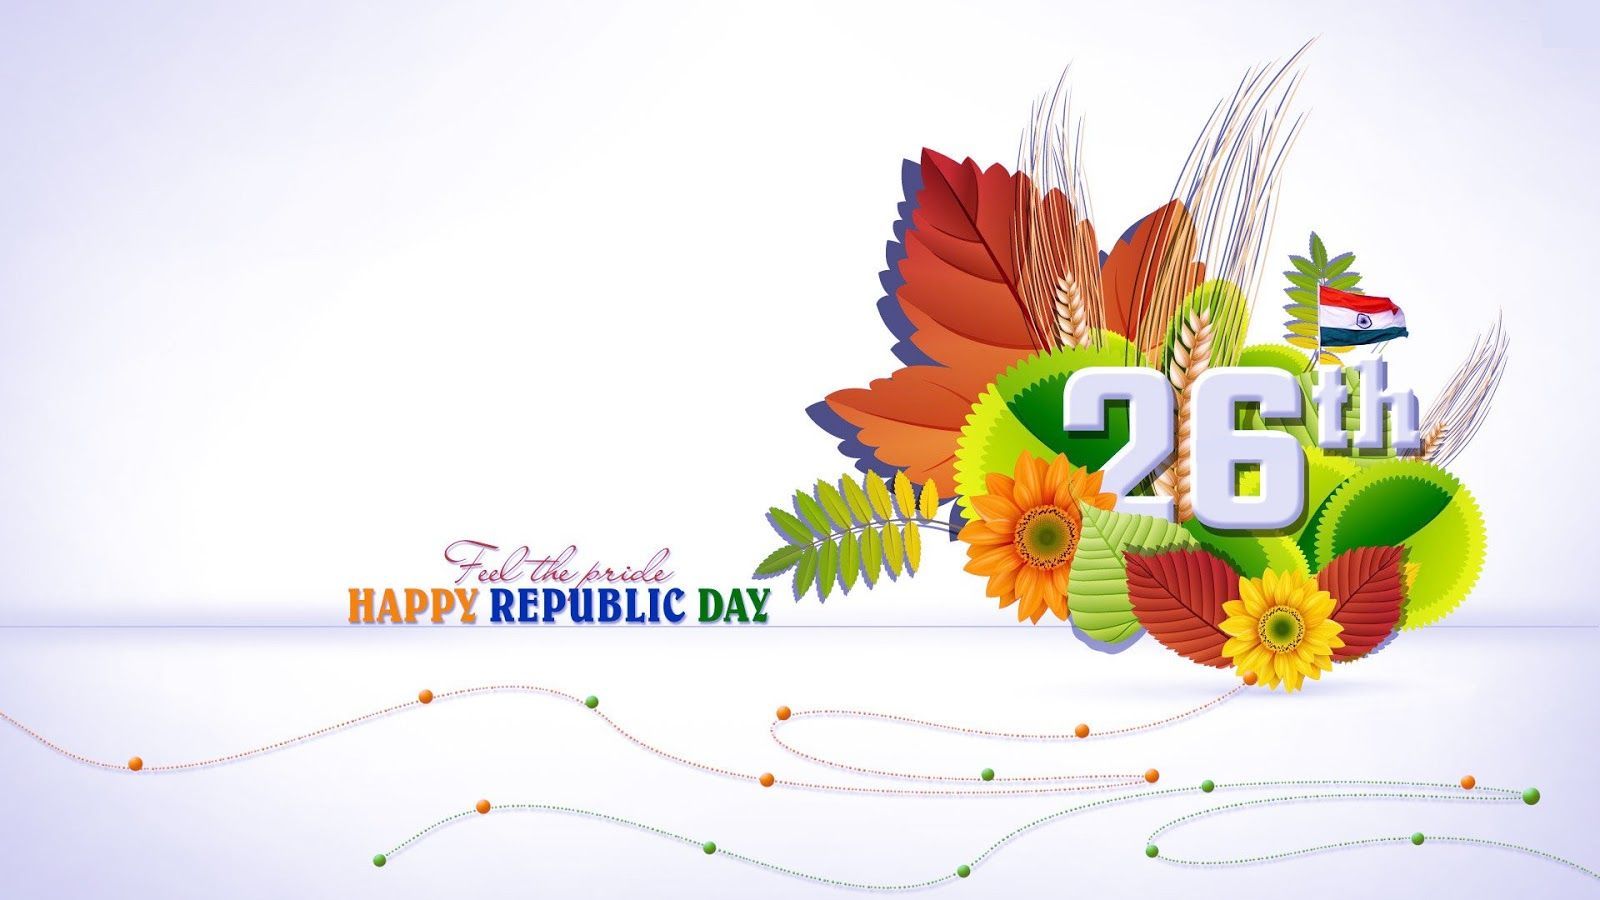 India Republic Day 2021 Wallpapers - Wallpaper Cave